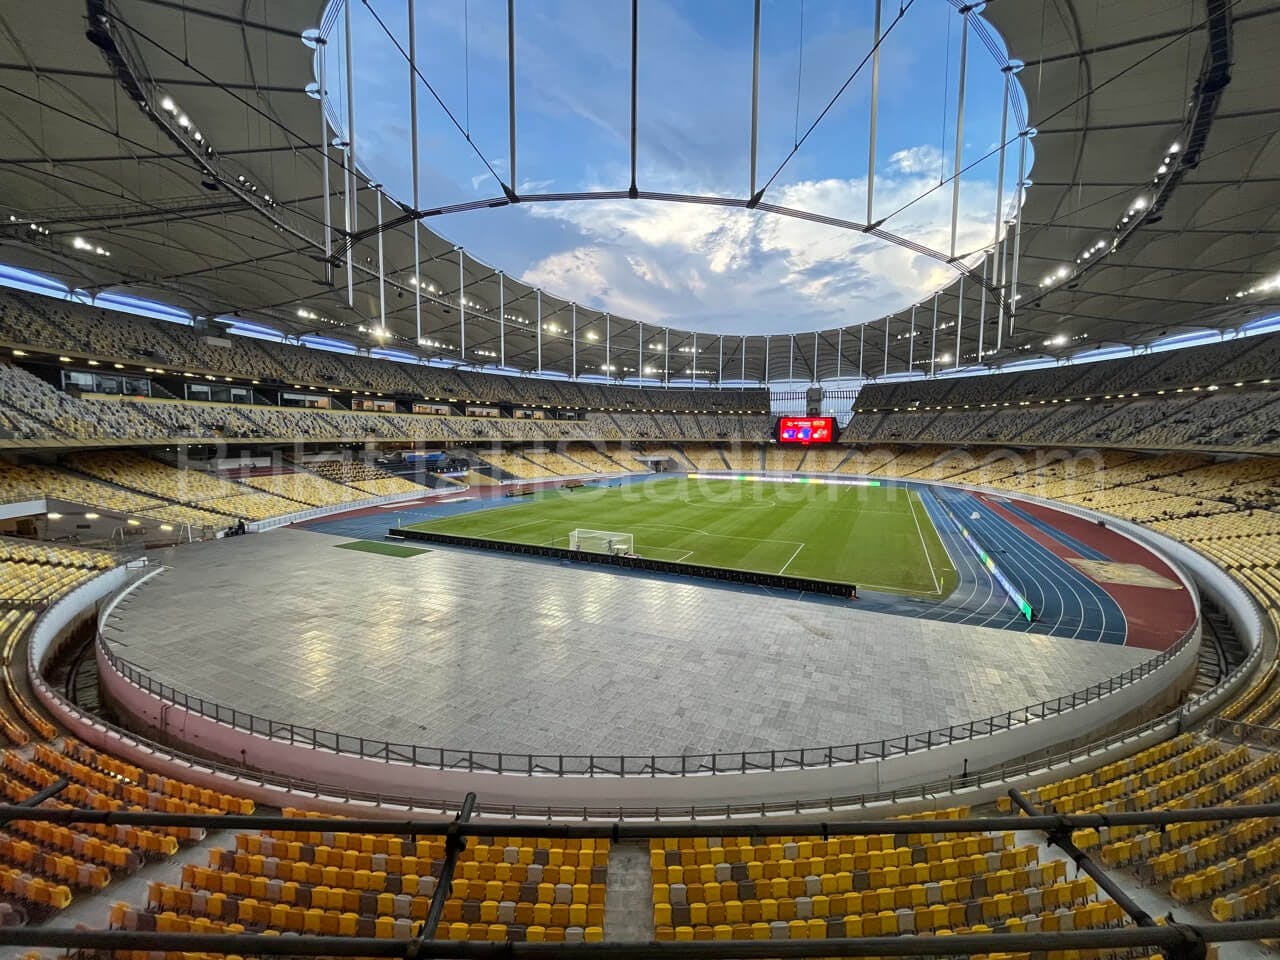 0.5x View of Bukit Jalil field from section 219 of Stadium Bukit Jalil.